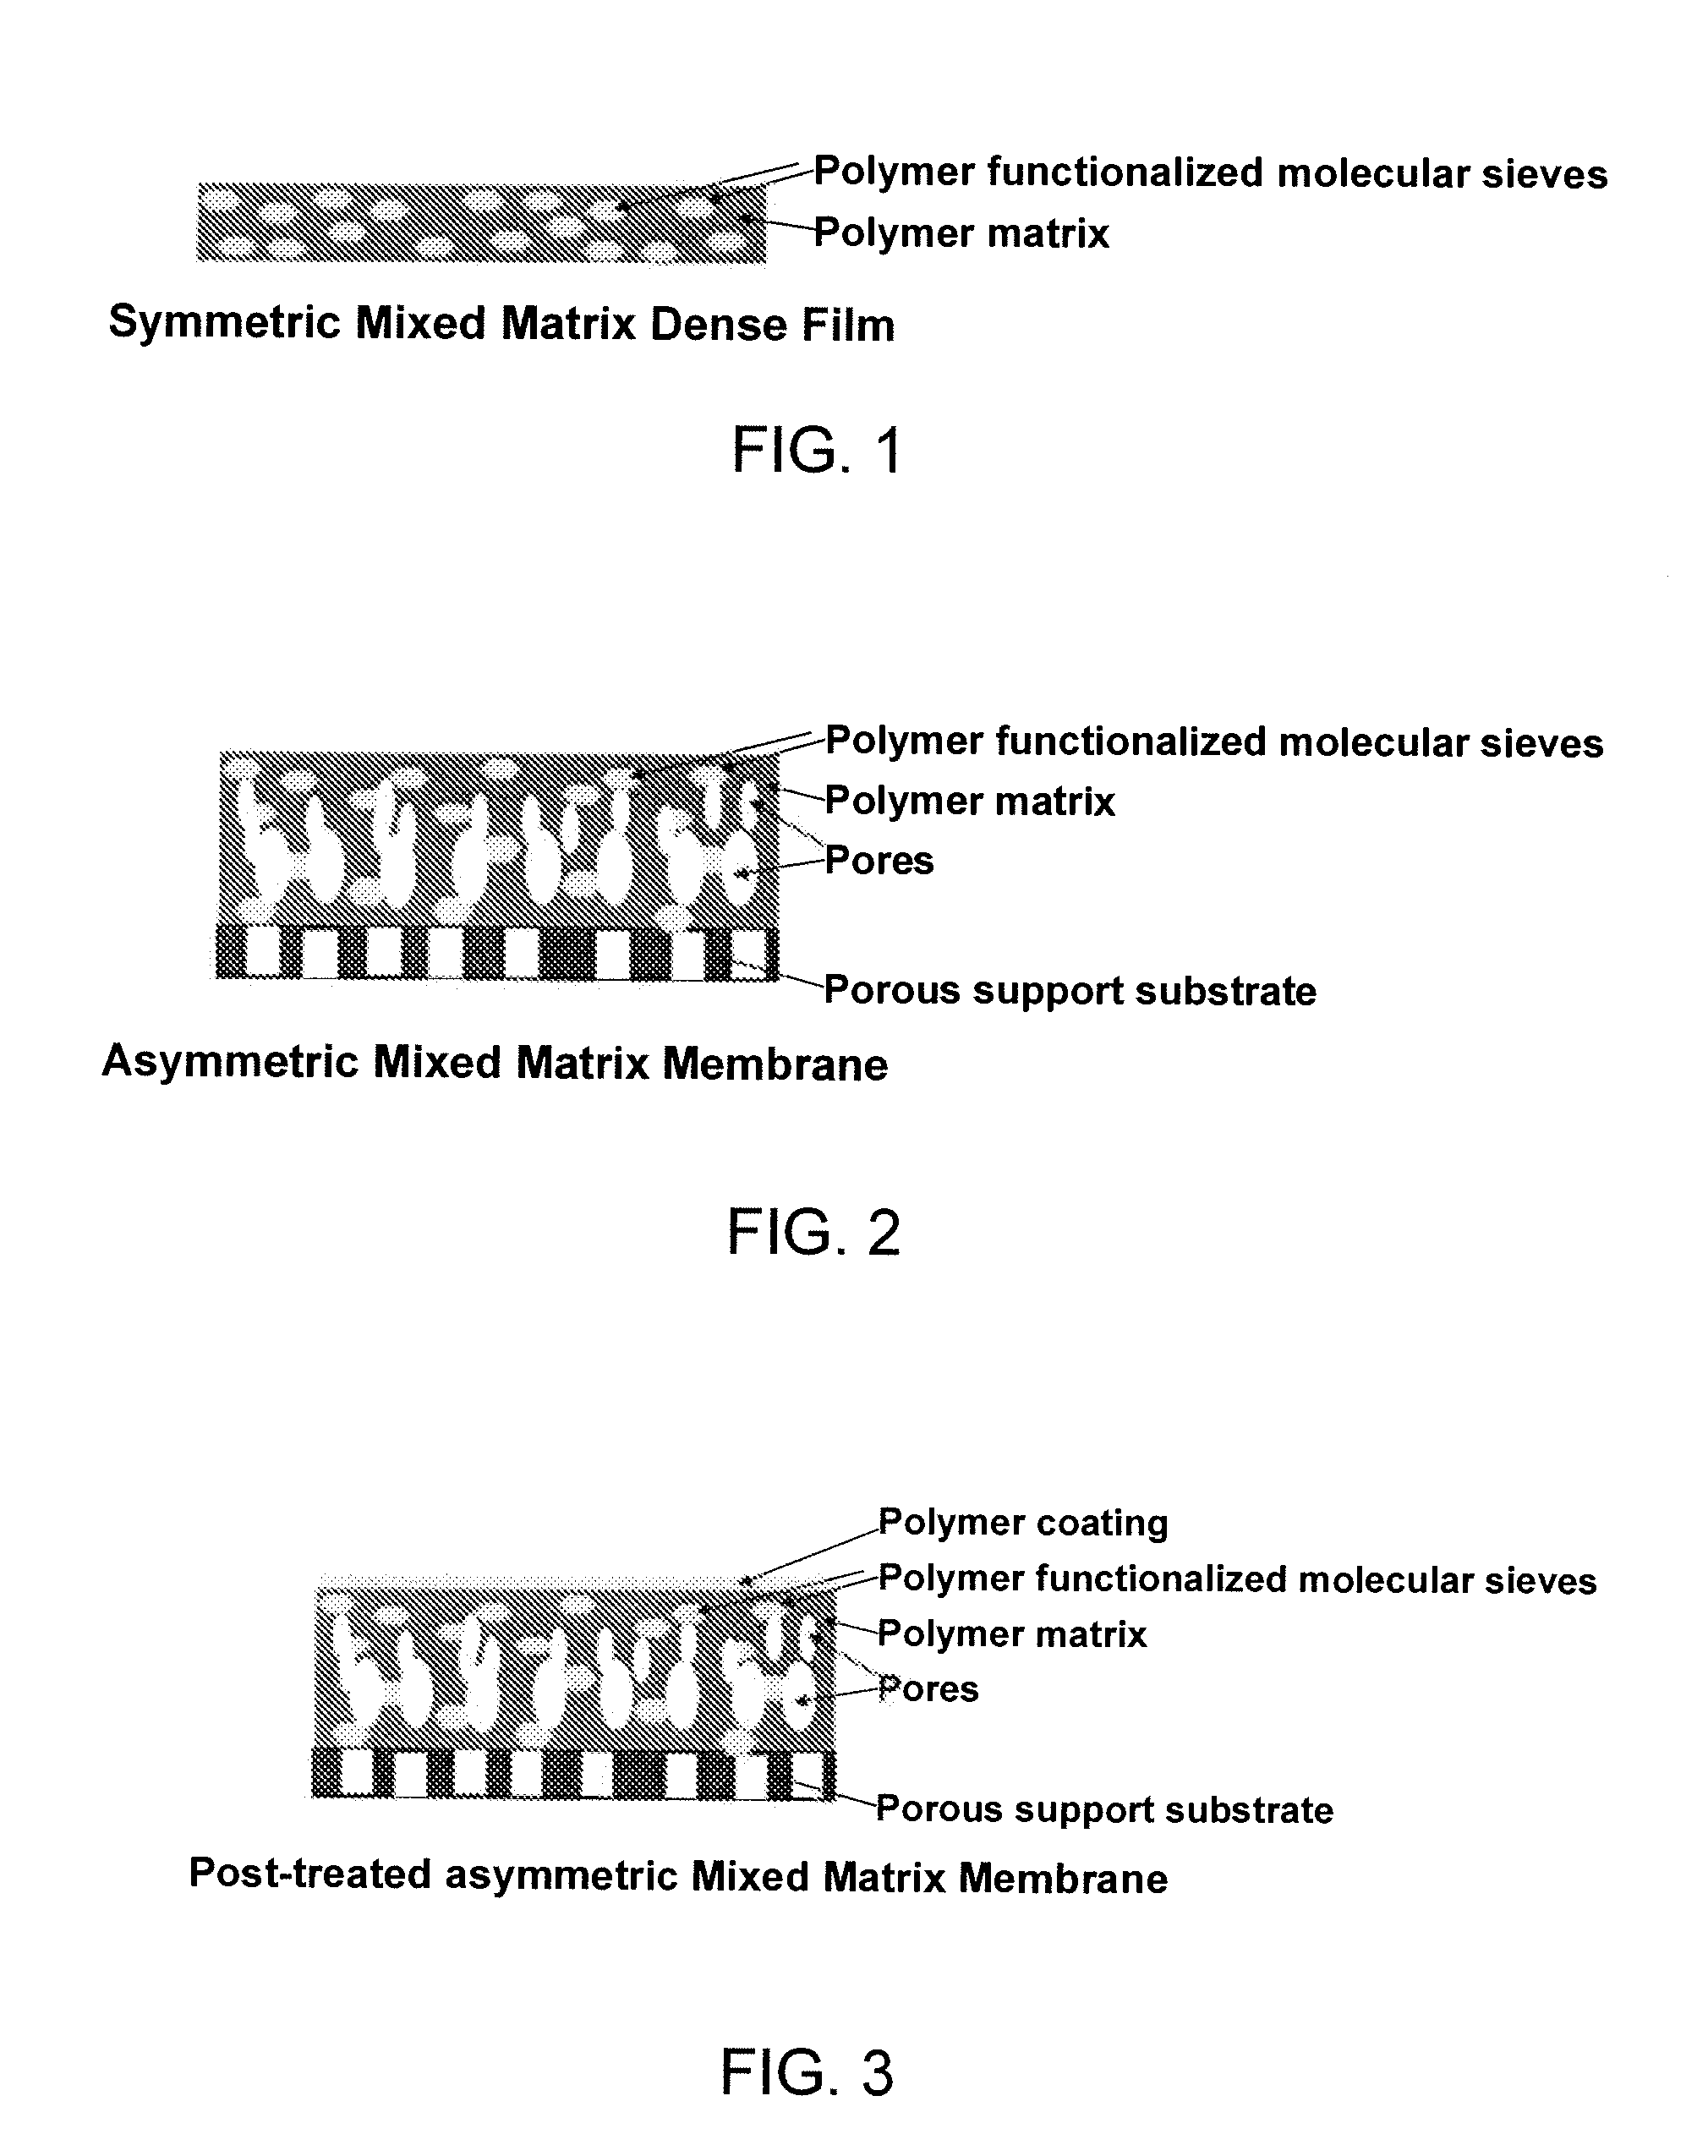 Polymer Functionalized Molecular Sieve/Polymer Mixed Matrix Membranes